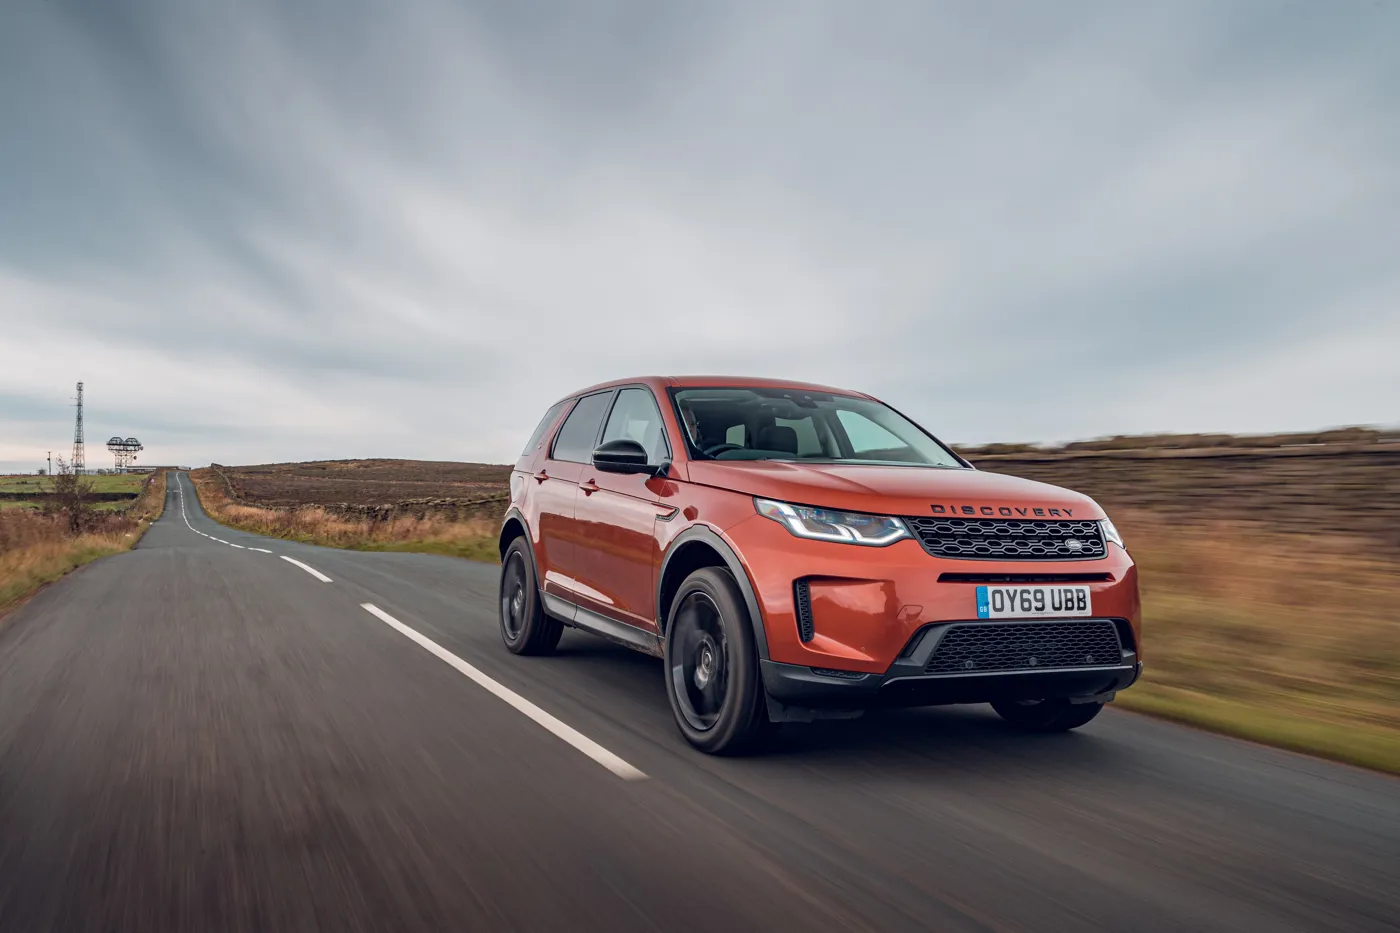 https://cdn-images.fleetnews.co.uk/thumbs/1400x1000/web-clean/1/land-rover-discovery-sport-facelift-first-drive/2discovery-sport-20my-uk-1008.jpg